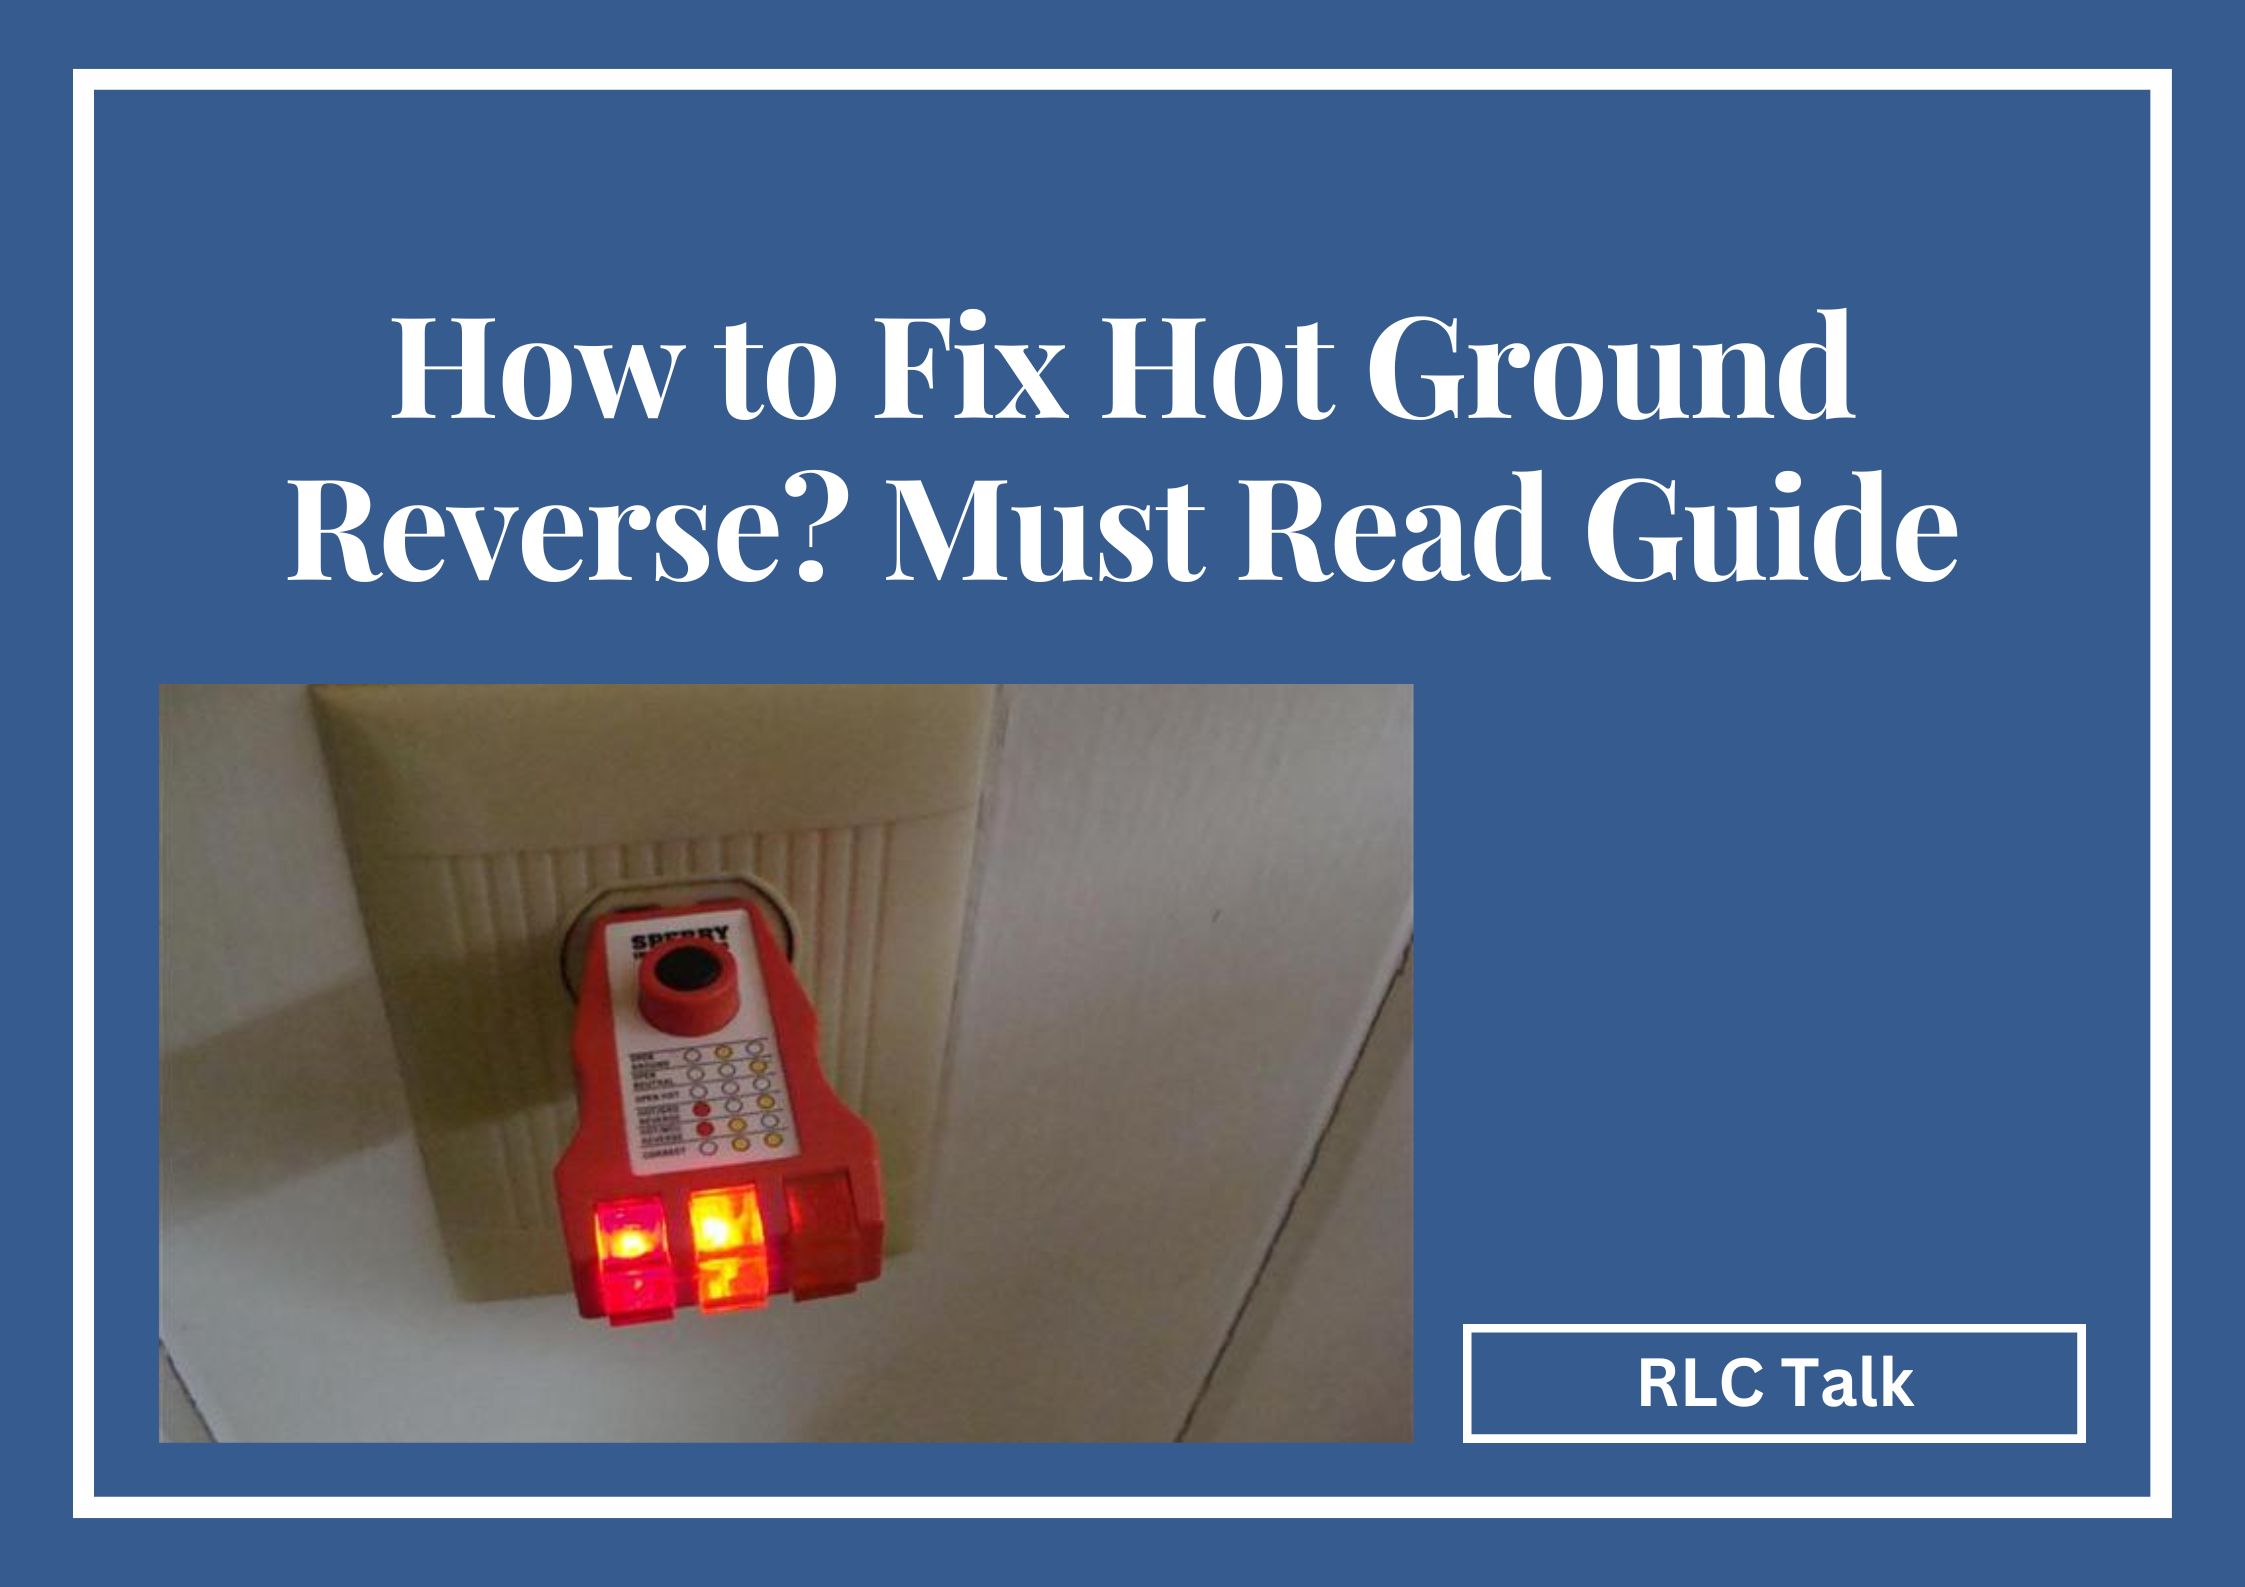 How to Fix Hot Ground Reverse